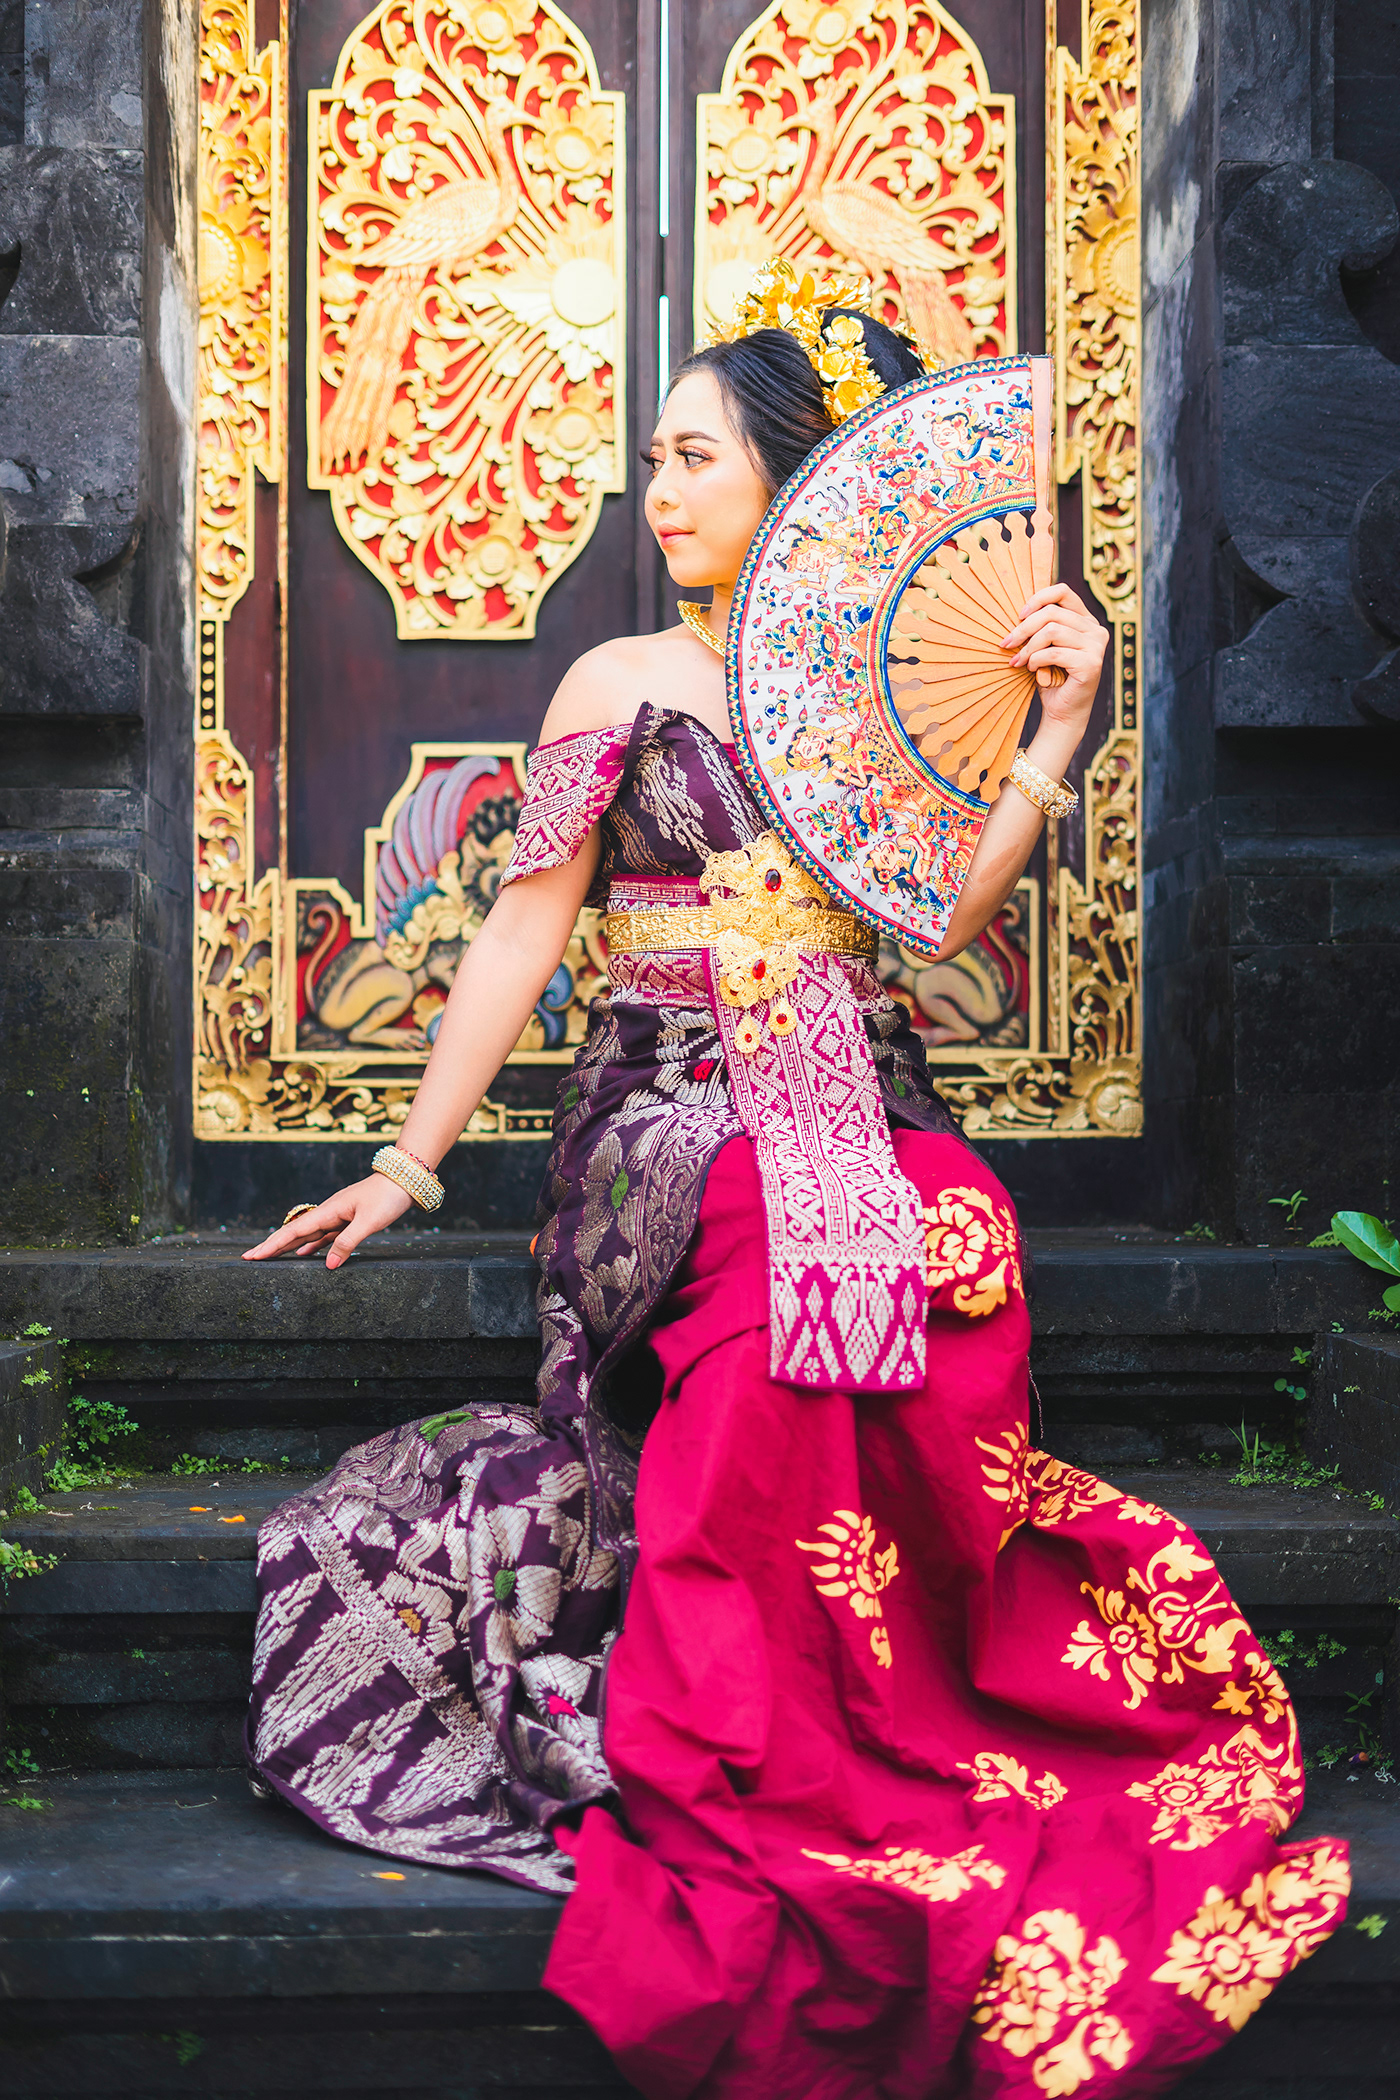 balinese photoshoot culture